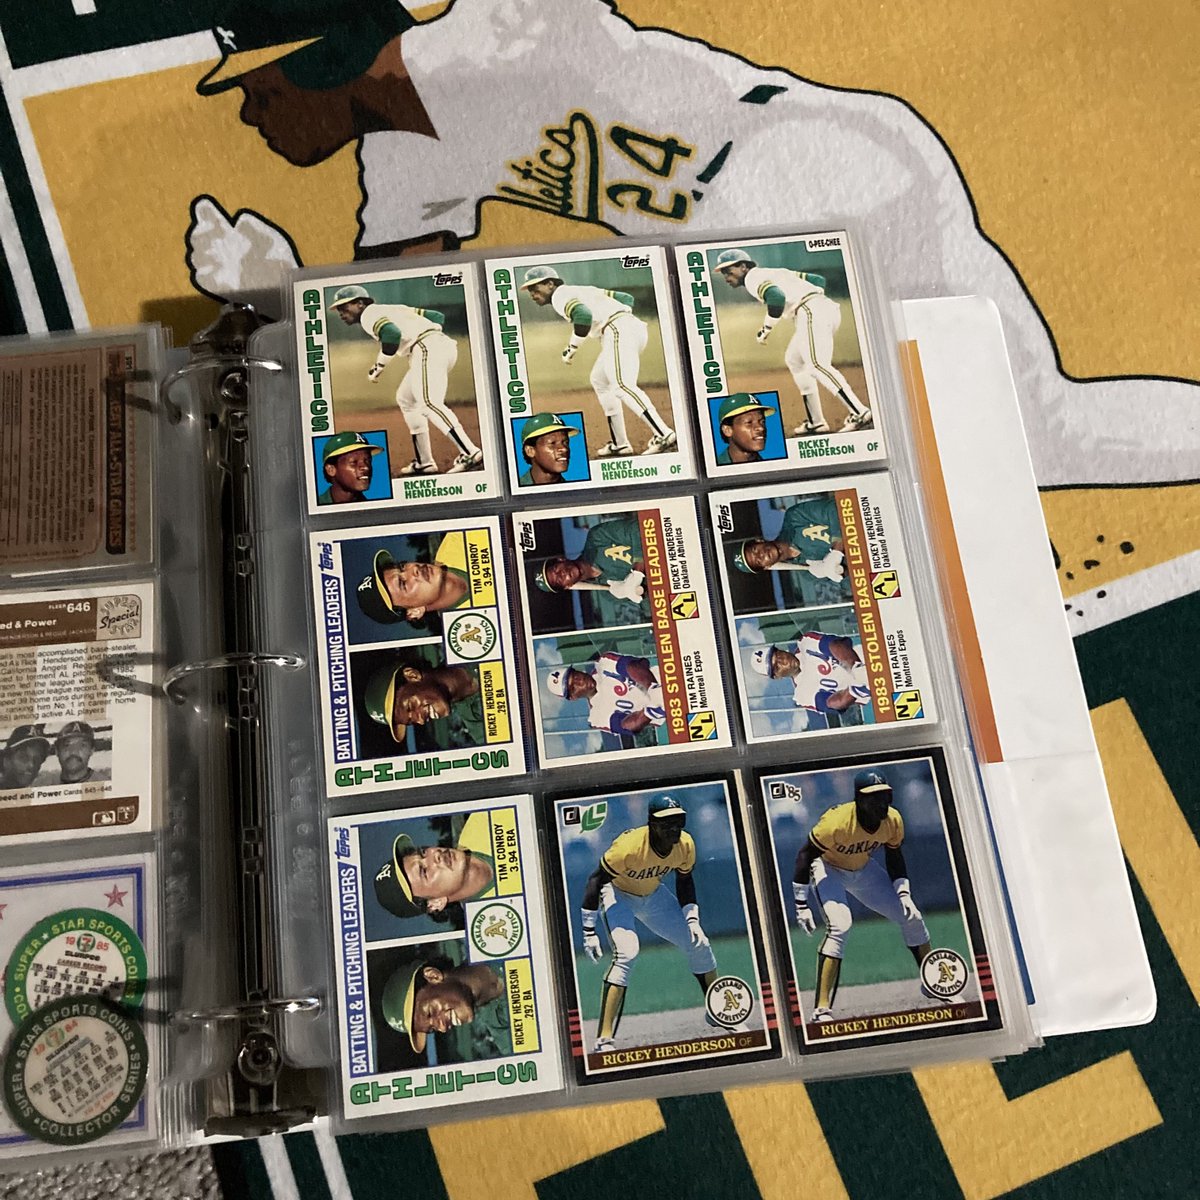 Todays Rickey Henderson PC swag is this random binder page bling from 1984/85 era! Love the @Topps design that year with Tiffany’s and ‘85 Donruss did not disappoint…@CardPurchaser 💚🔥👀🐐⚾️🏃🏿💨🧤#rickeyhenderson #thehobby